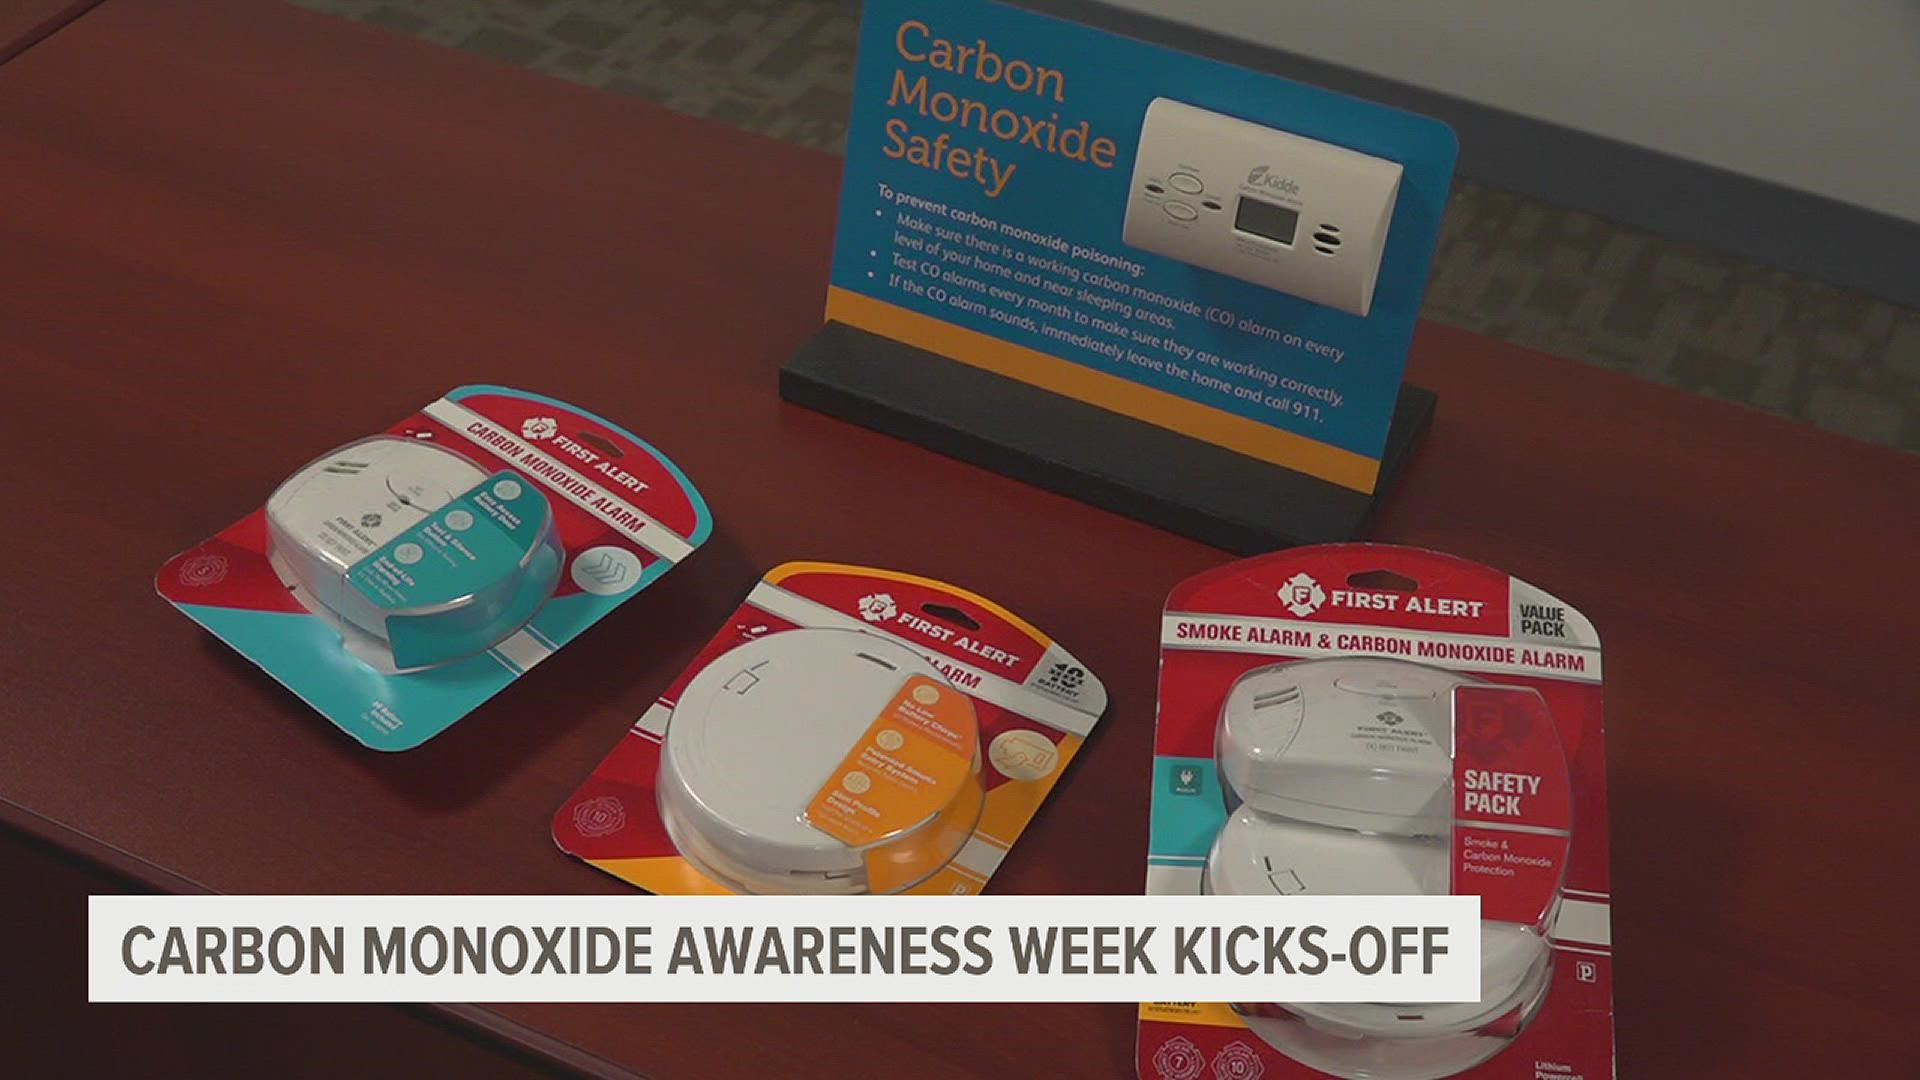 Carbon Monoxide is a colorless, odorless and tasteless gas that kills more than 400 people and sends about 50,000 people to the hospital every year in the U.S.